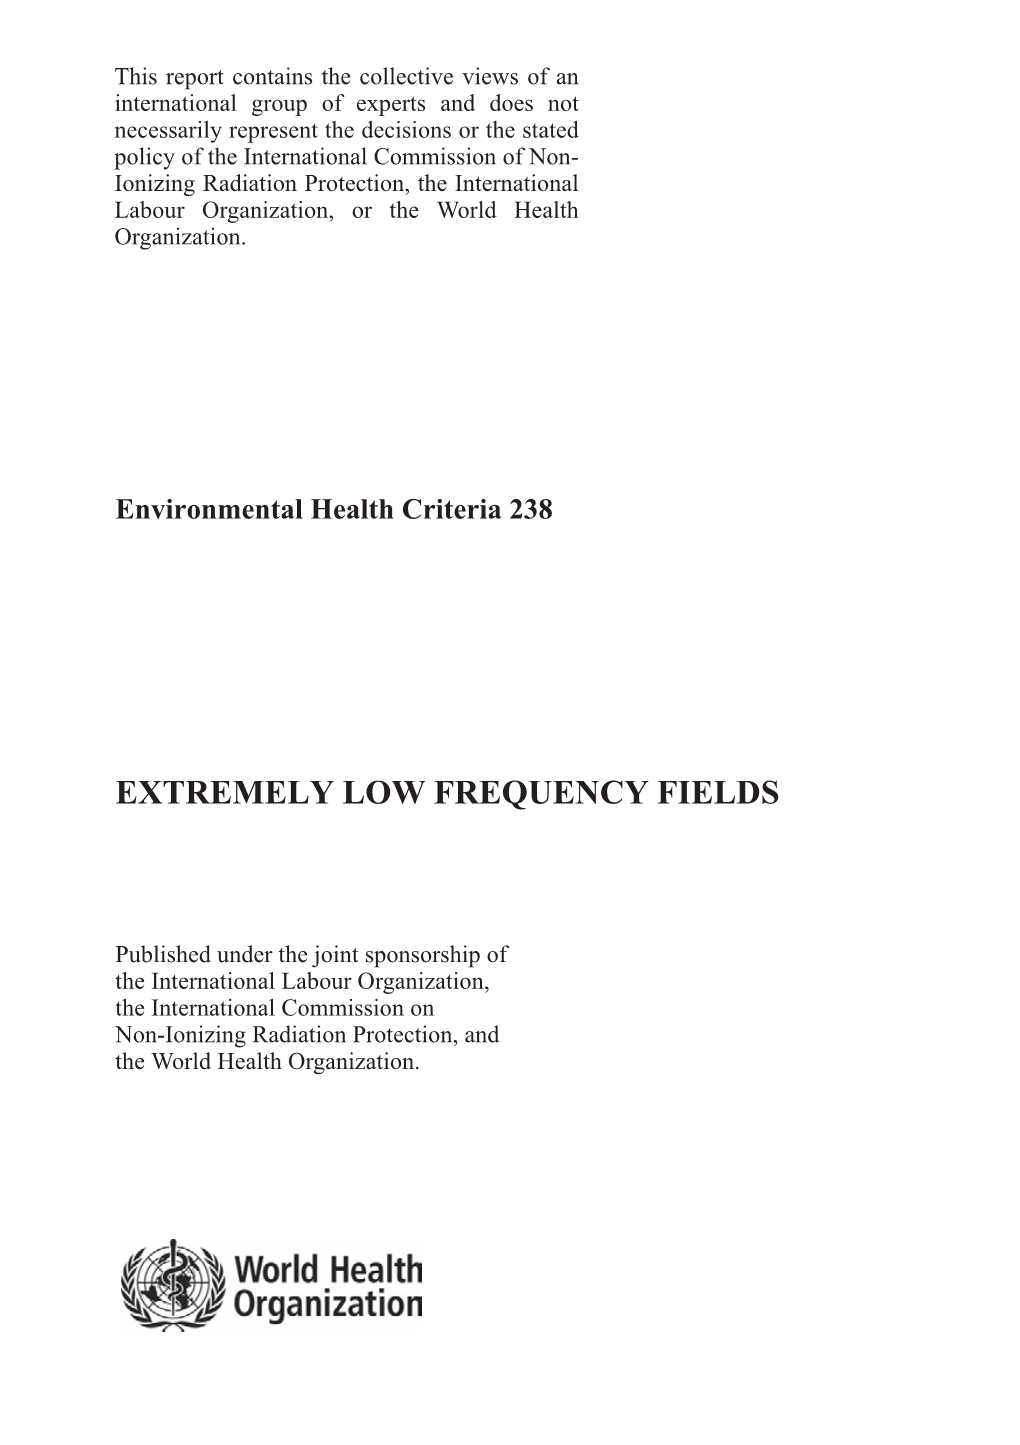 World Health Organization, Extremely Low Frequency Fields, 2007